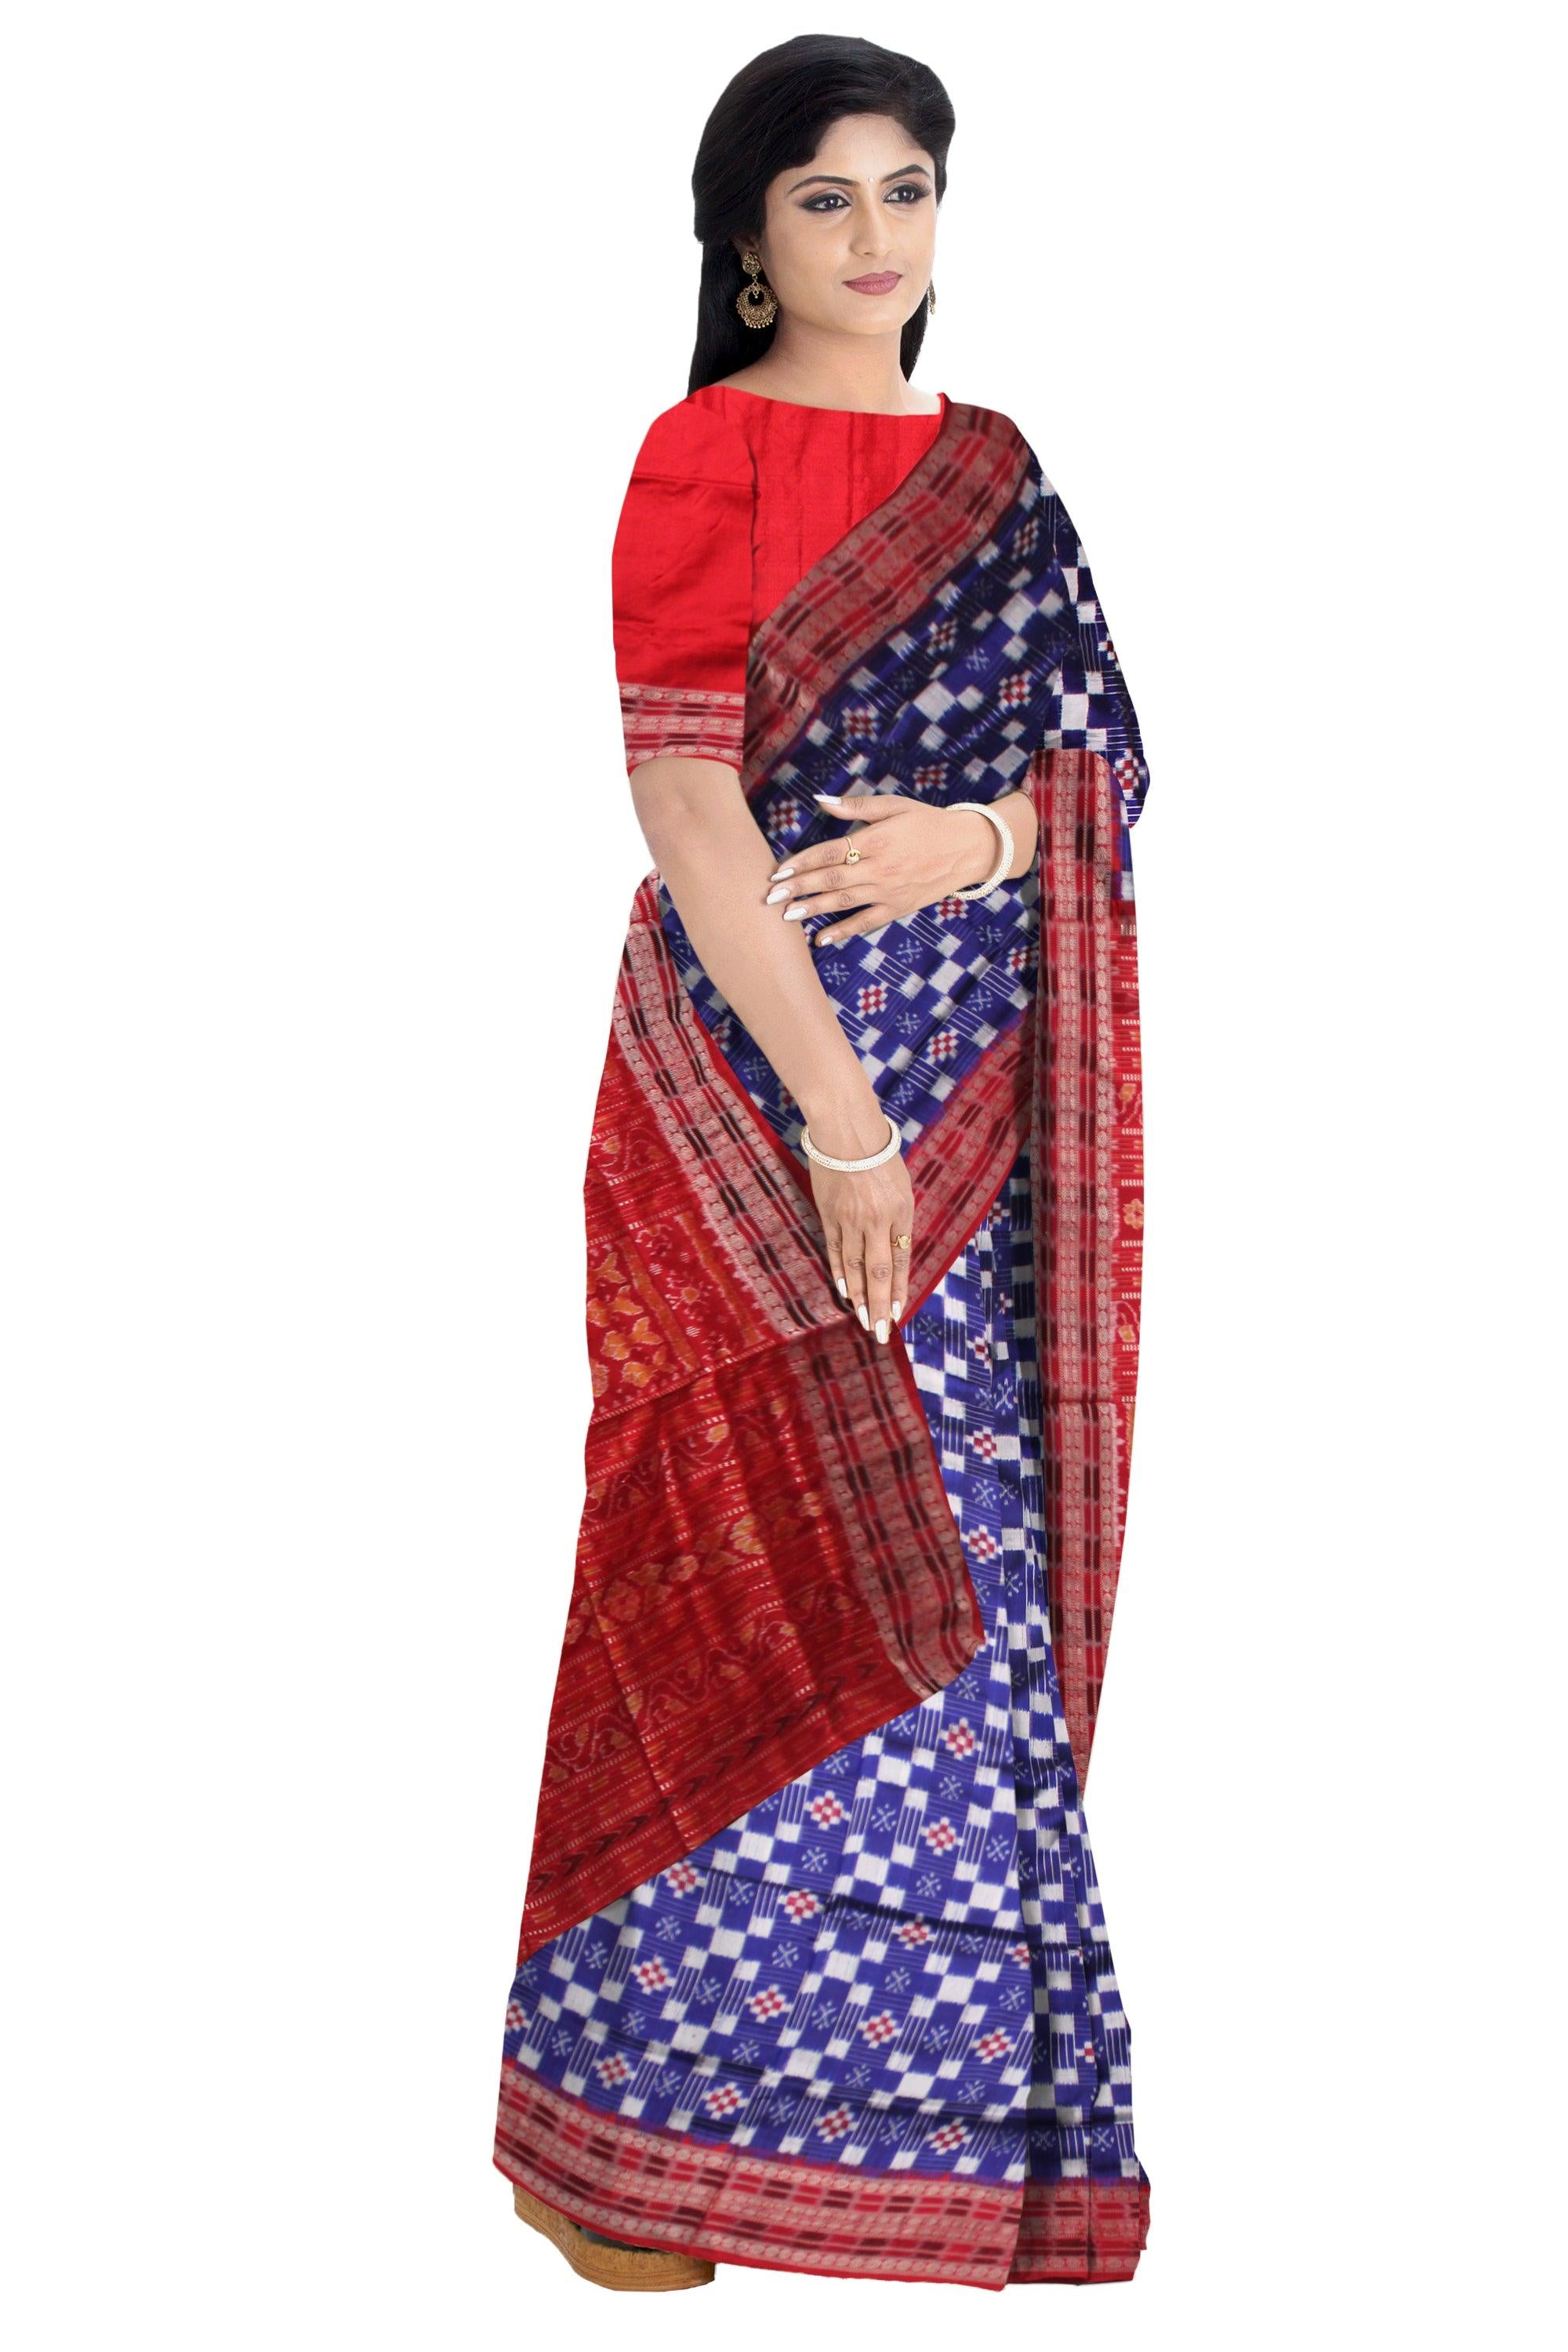 FESTIVAL COLLECTION  PASAPALI PATTERN PATA SAREE IN BLUE AND RED COLOR BASE, ATTACHED WITH BLOUSE PIECE. - Koshali Arts & Crafts Enterprise